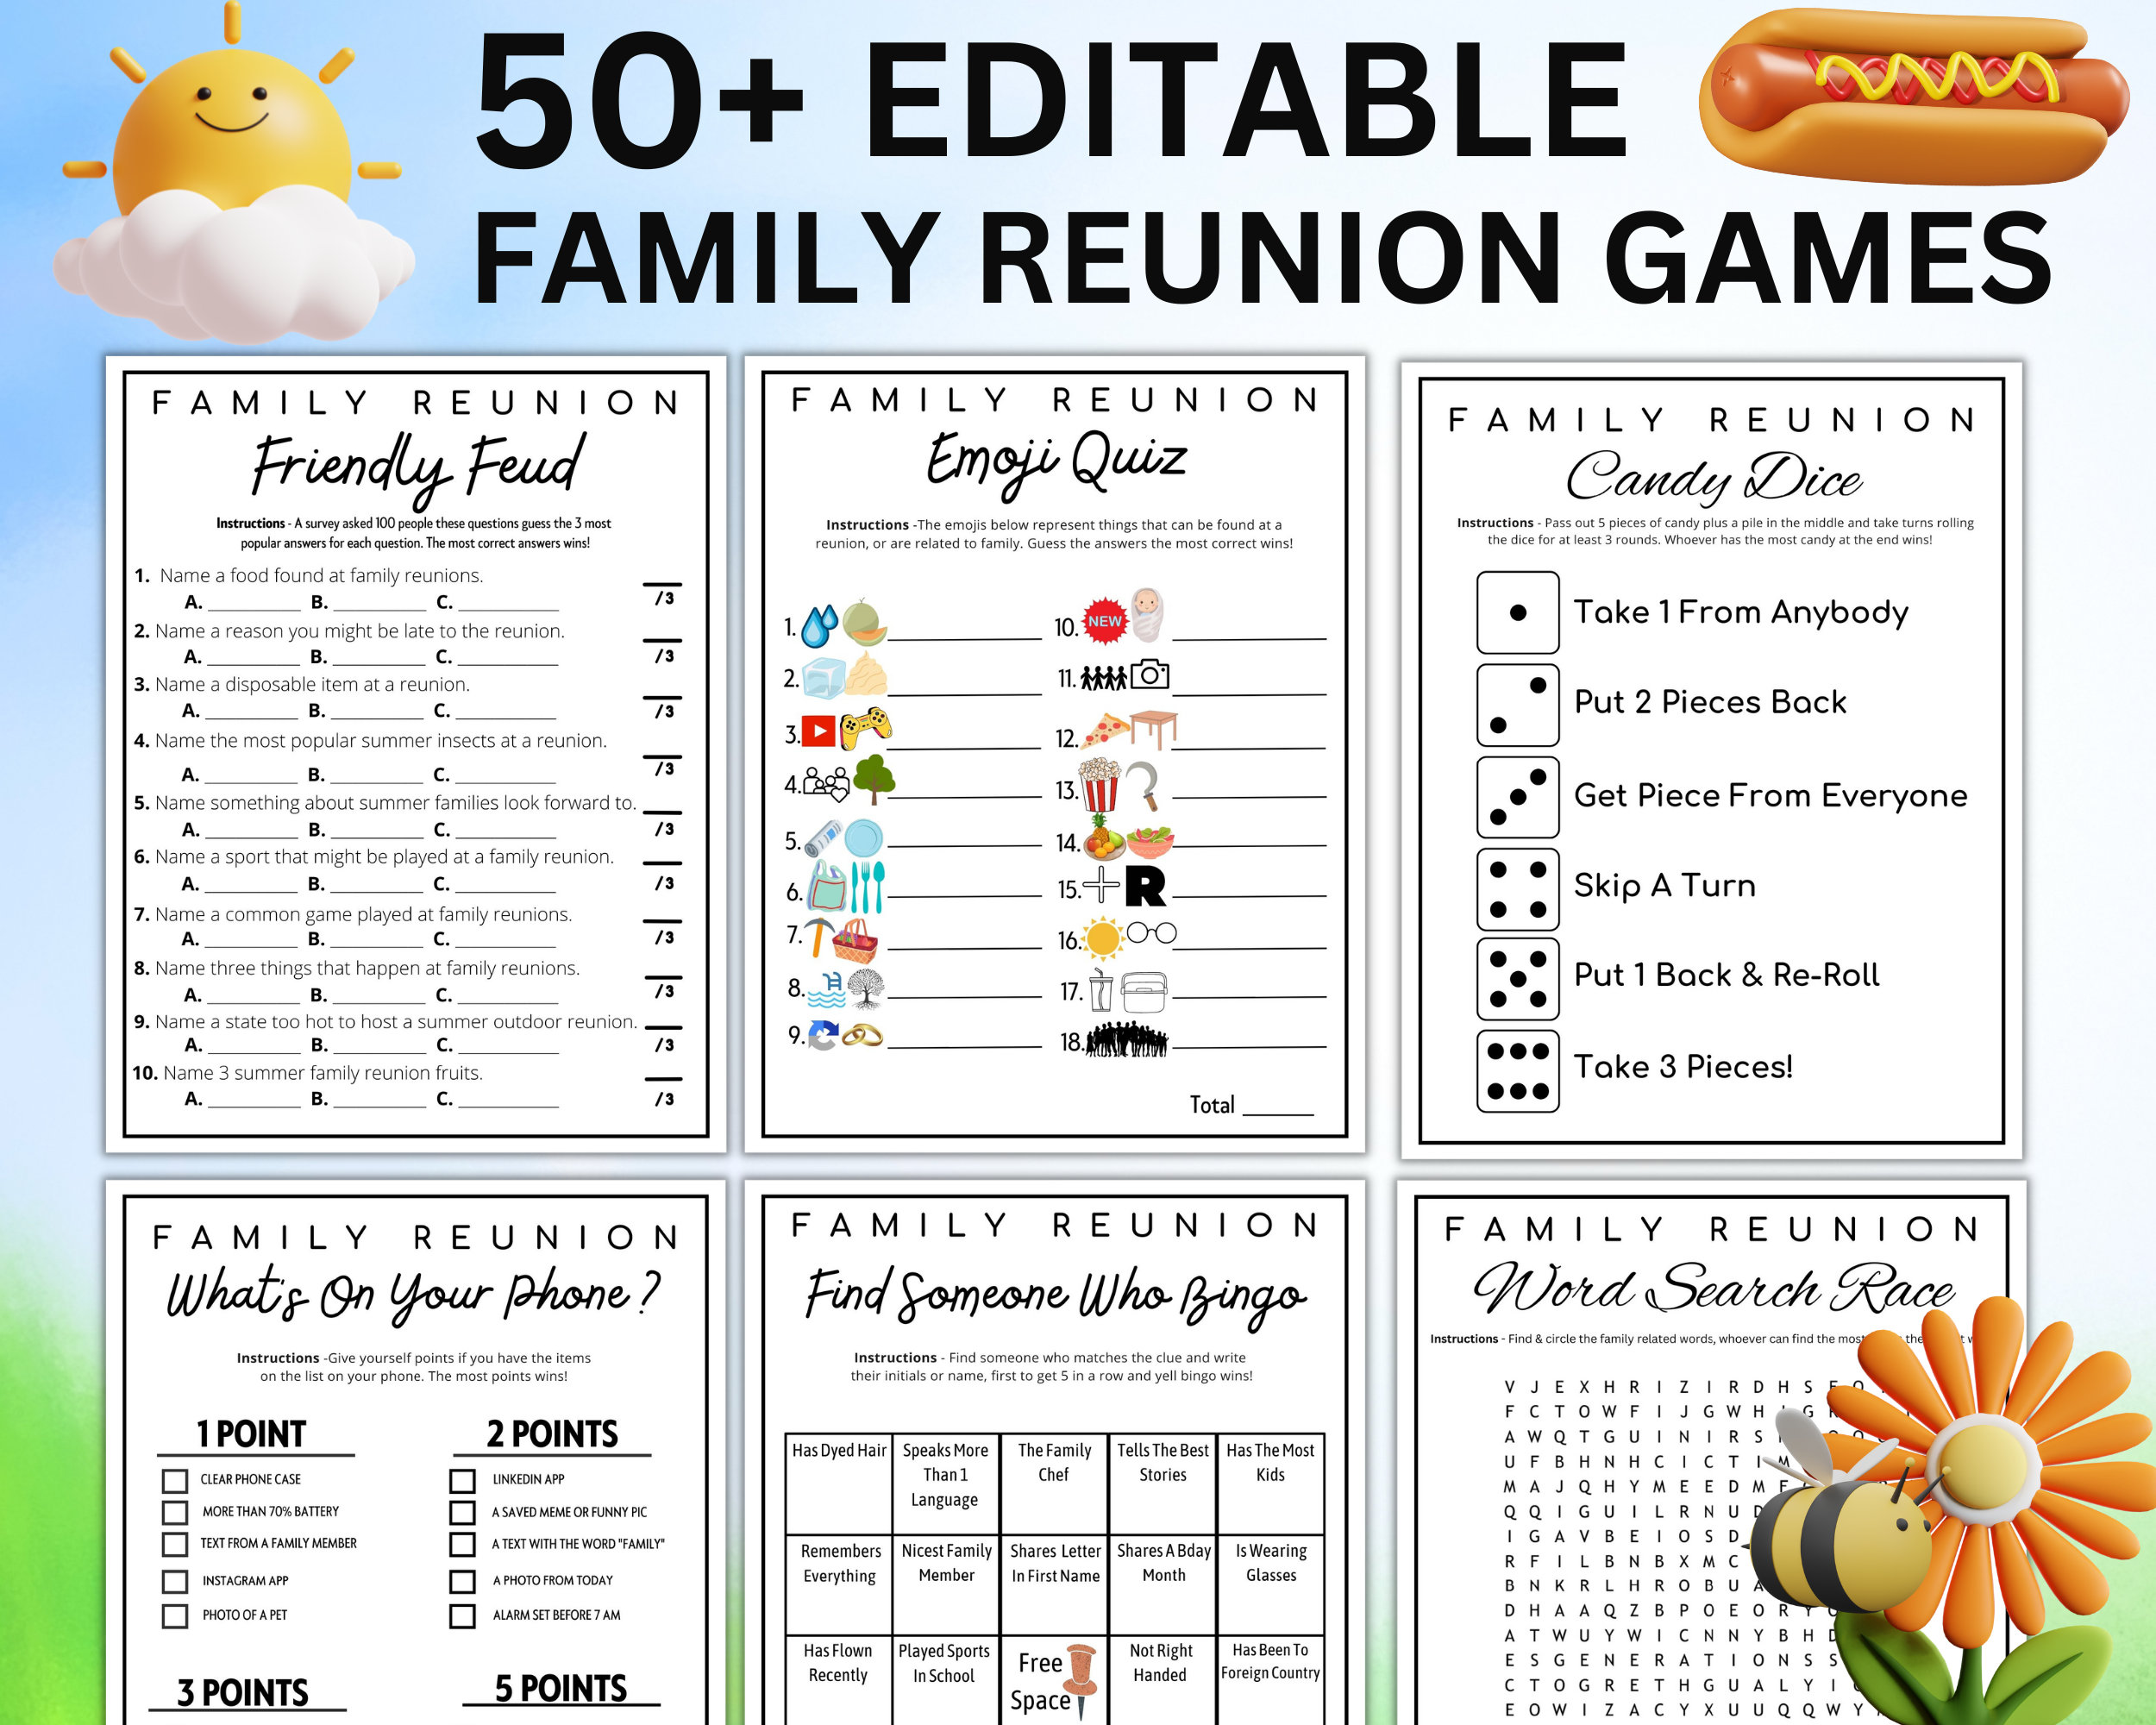 800+ Fun & Cool Team Names for Your Next Office Game